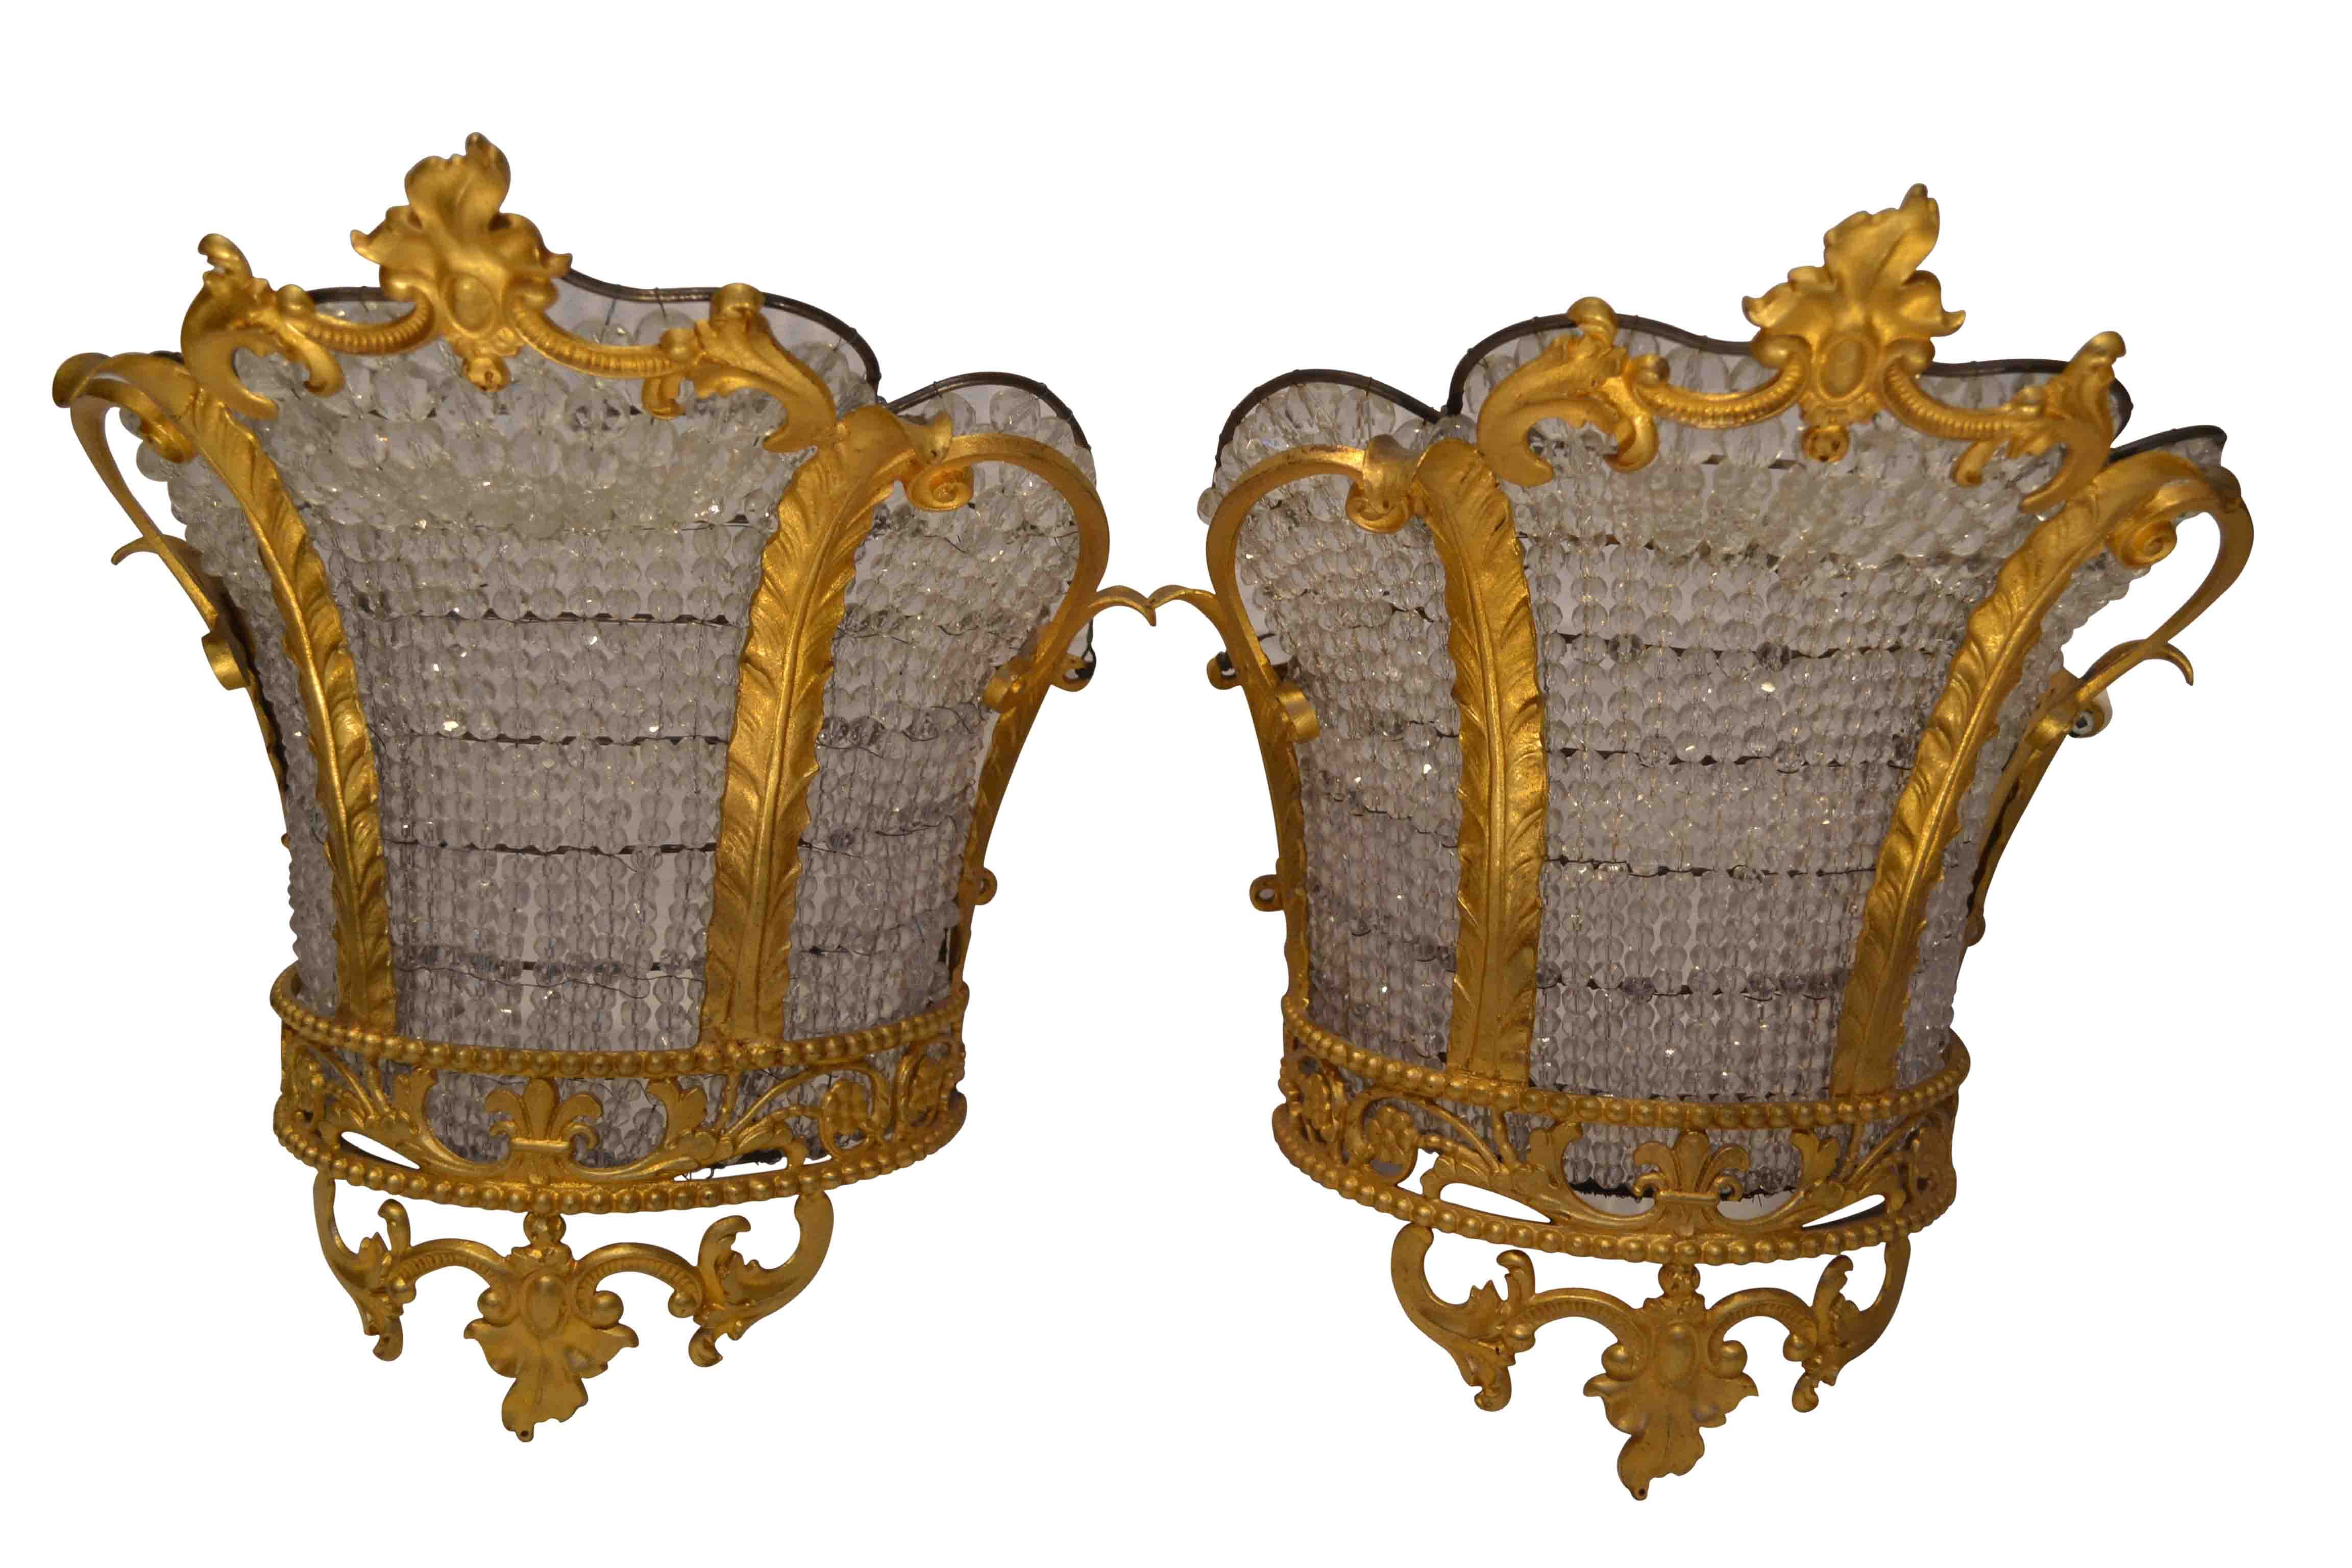 Pair of French gilt bronze and crystal beaded sconces in the shape of crowns